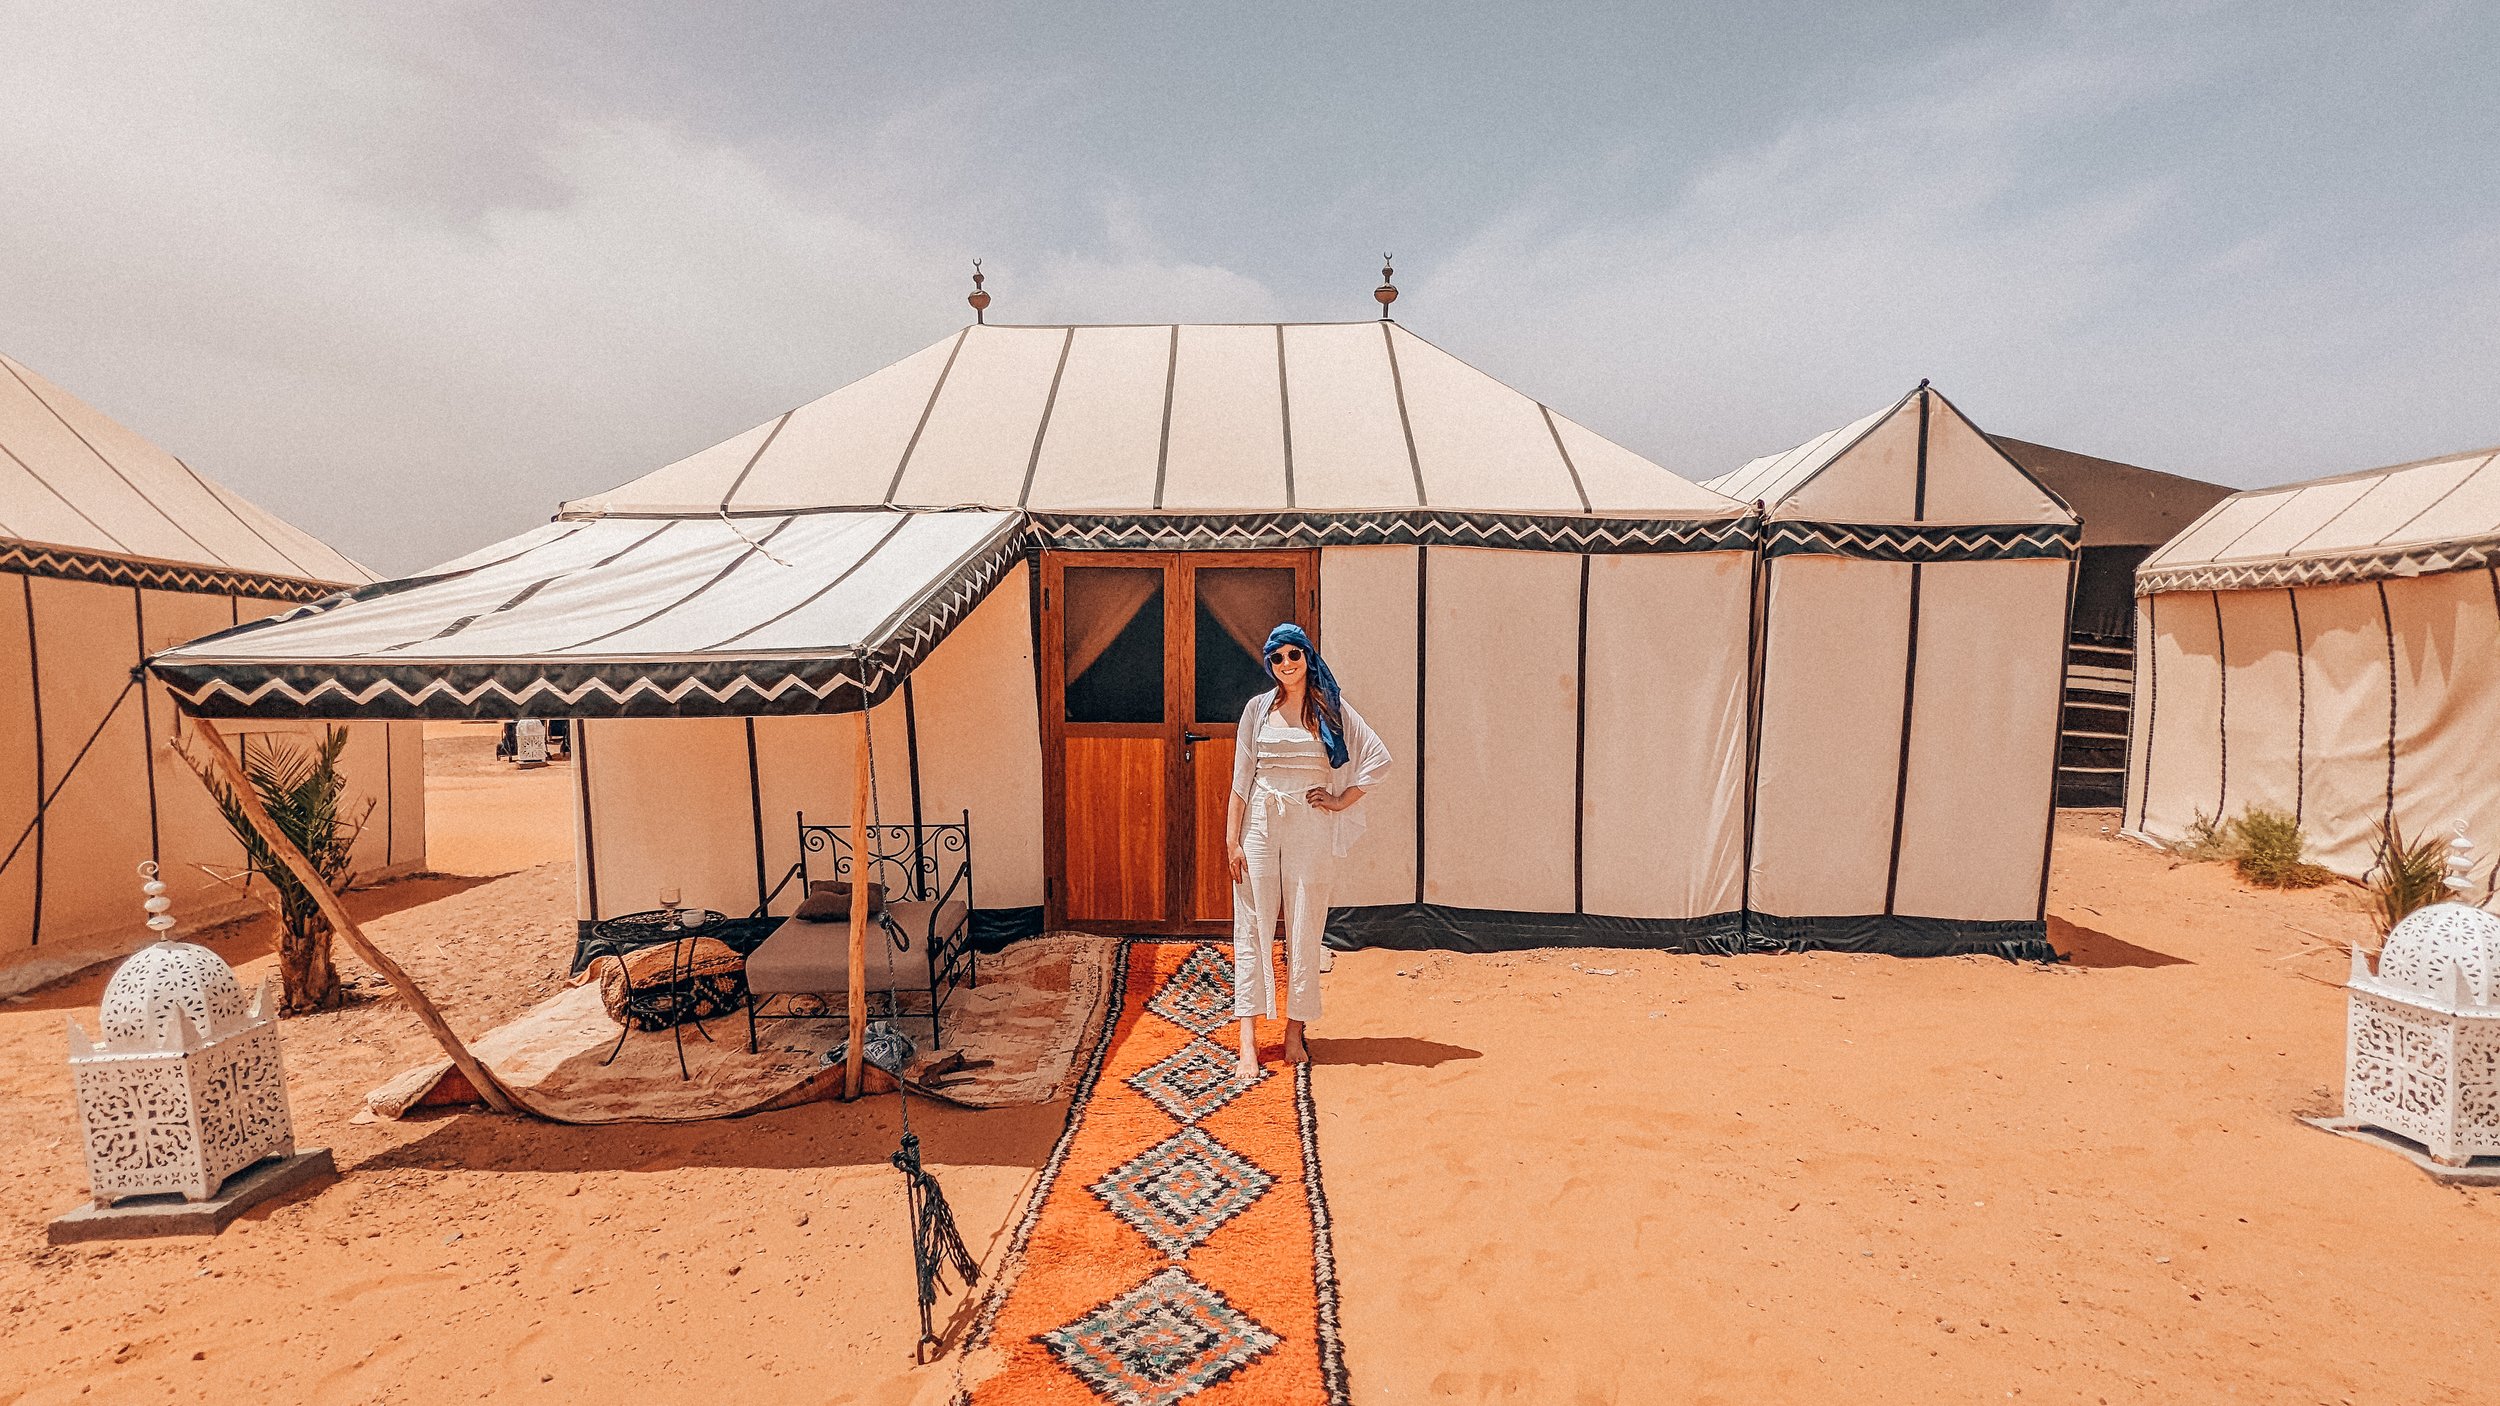 Sahara Desert: A journey into the Sahara Desert is a once-in-a-lifetime experience. Spend a night under the stars in a desert camp, ride a camel across the dunes, and witness the breathtaking sunrise and sunset over the vast expanse of sand. ]]>